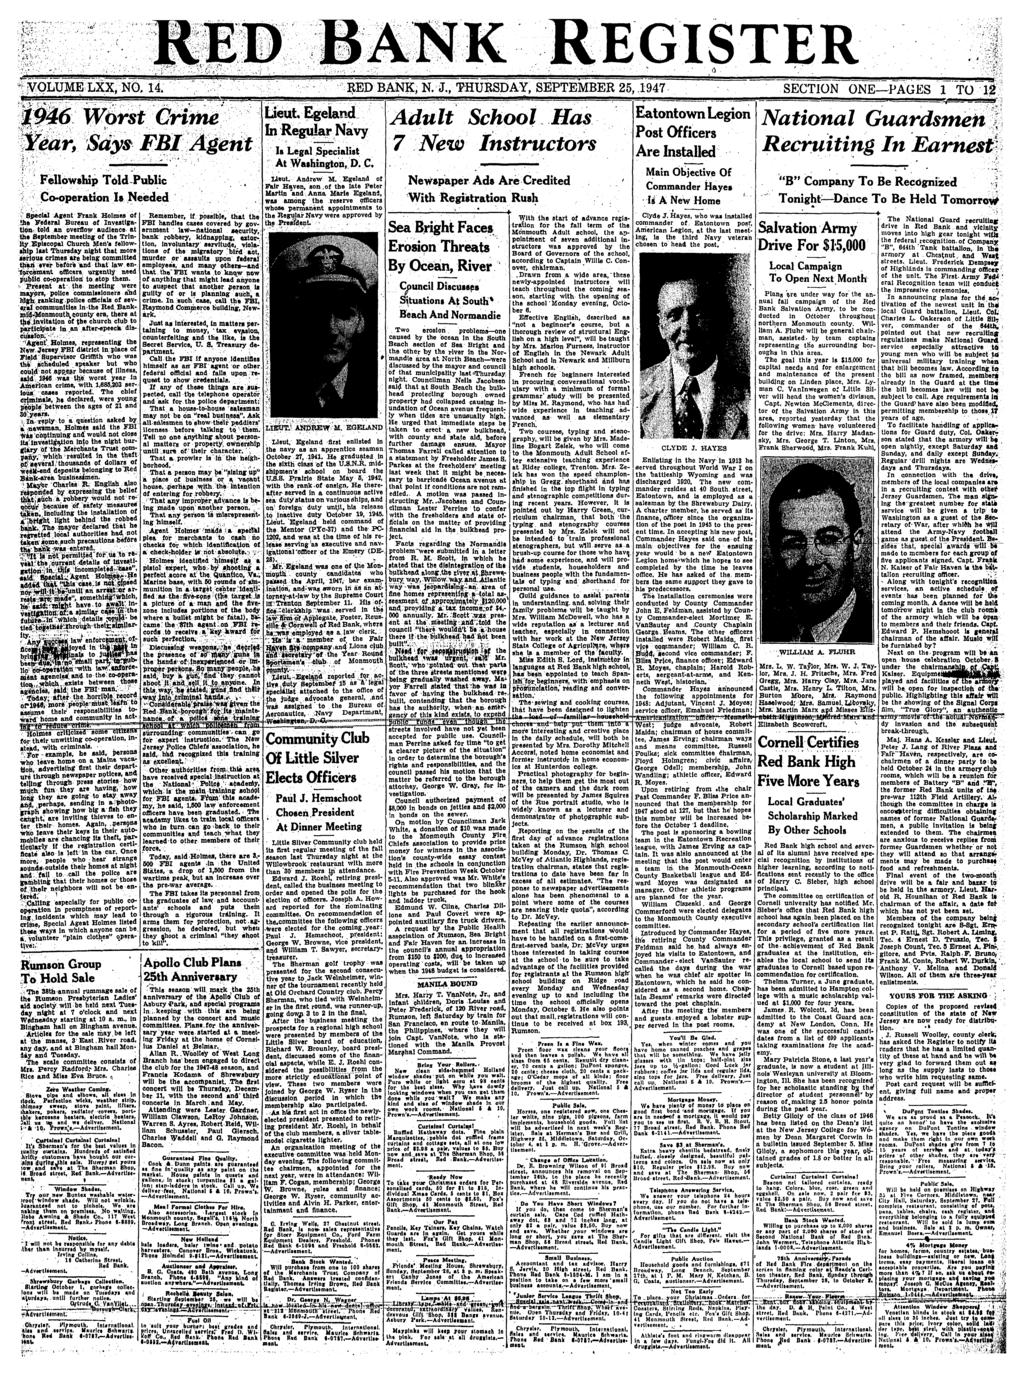 "^^.. *v. EGISTER LXX, NO. 14. BANK; N. J., THURSDAY, SEPTEMBER 25,,1947 SECTION ONE PAGES 1 TO 12 Fellowship Told Public Co-operation Is Needed Special Agent Frank Holmes of.